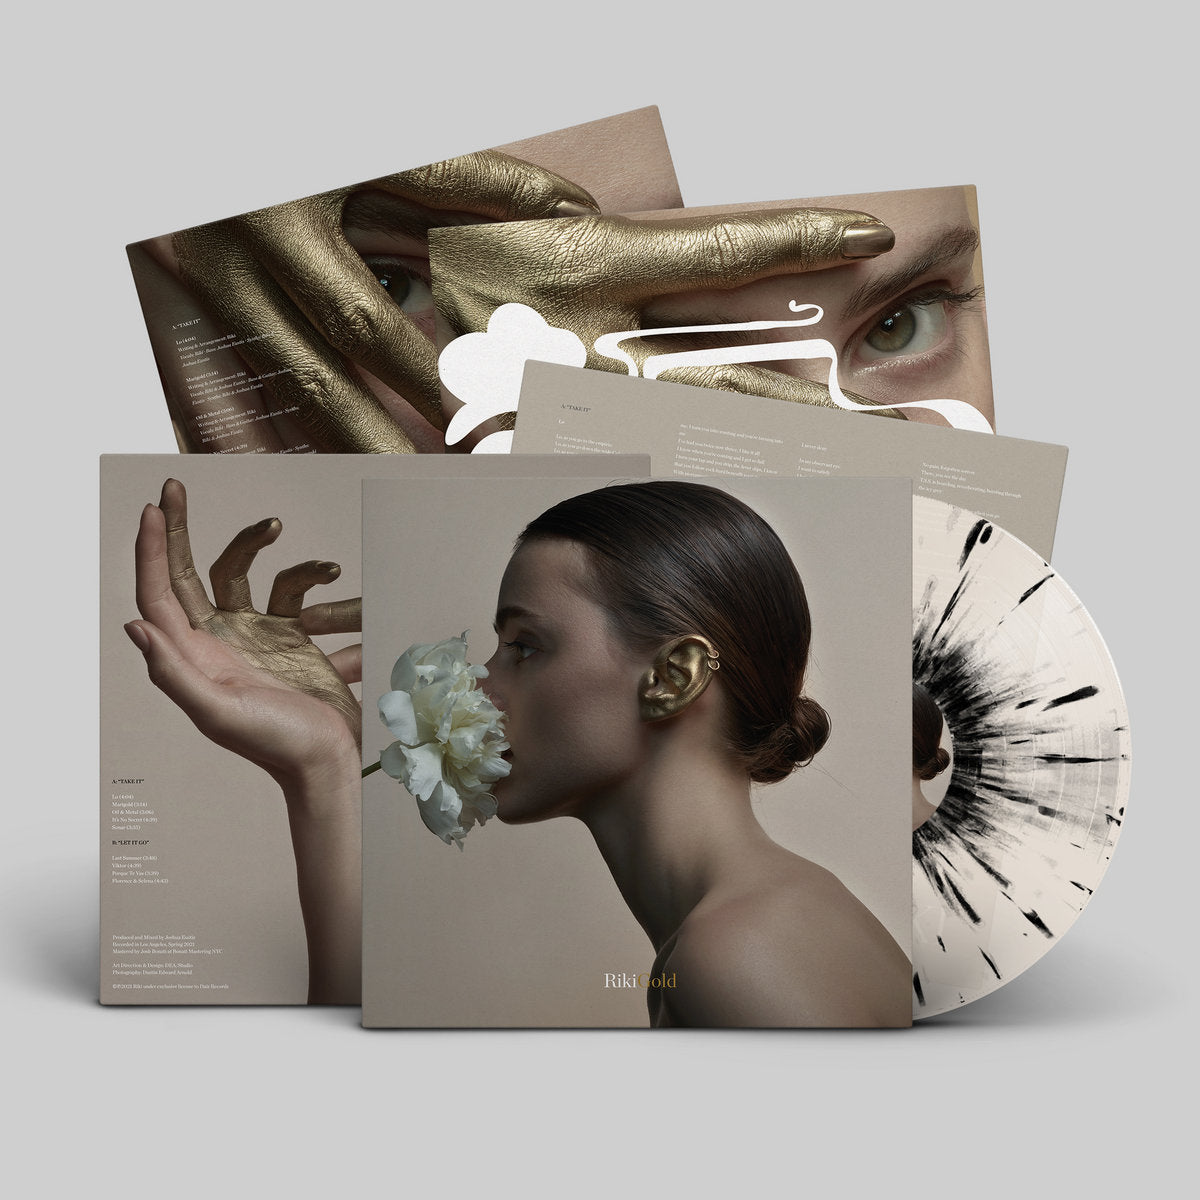 Riki - Gold (Limited Edition of 600 on Cloud White Vinyl)